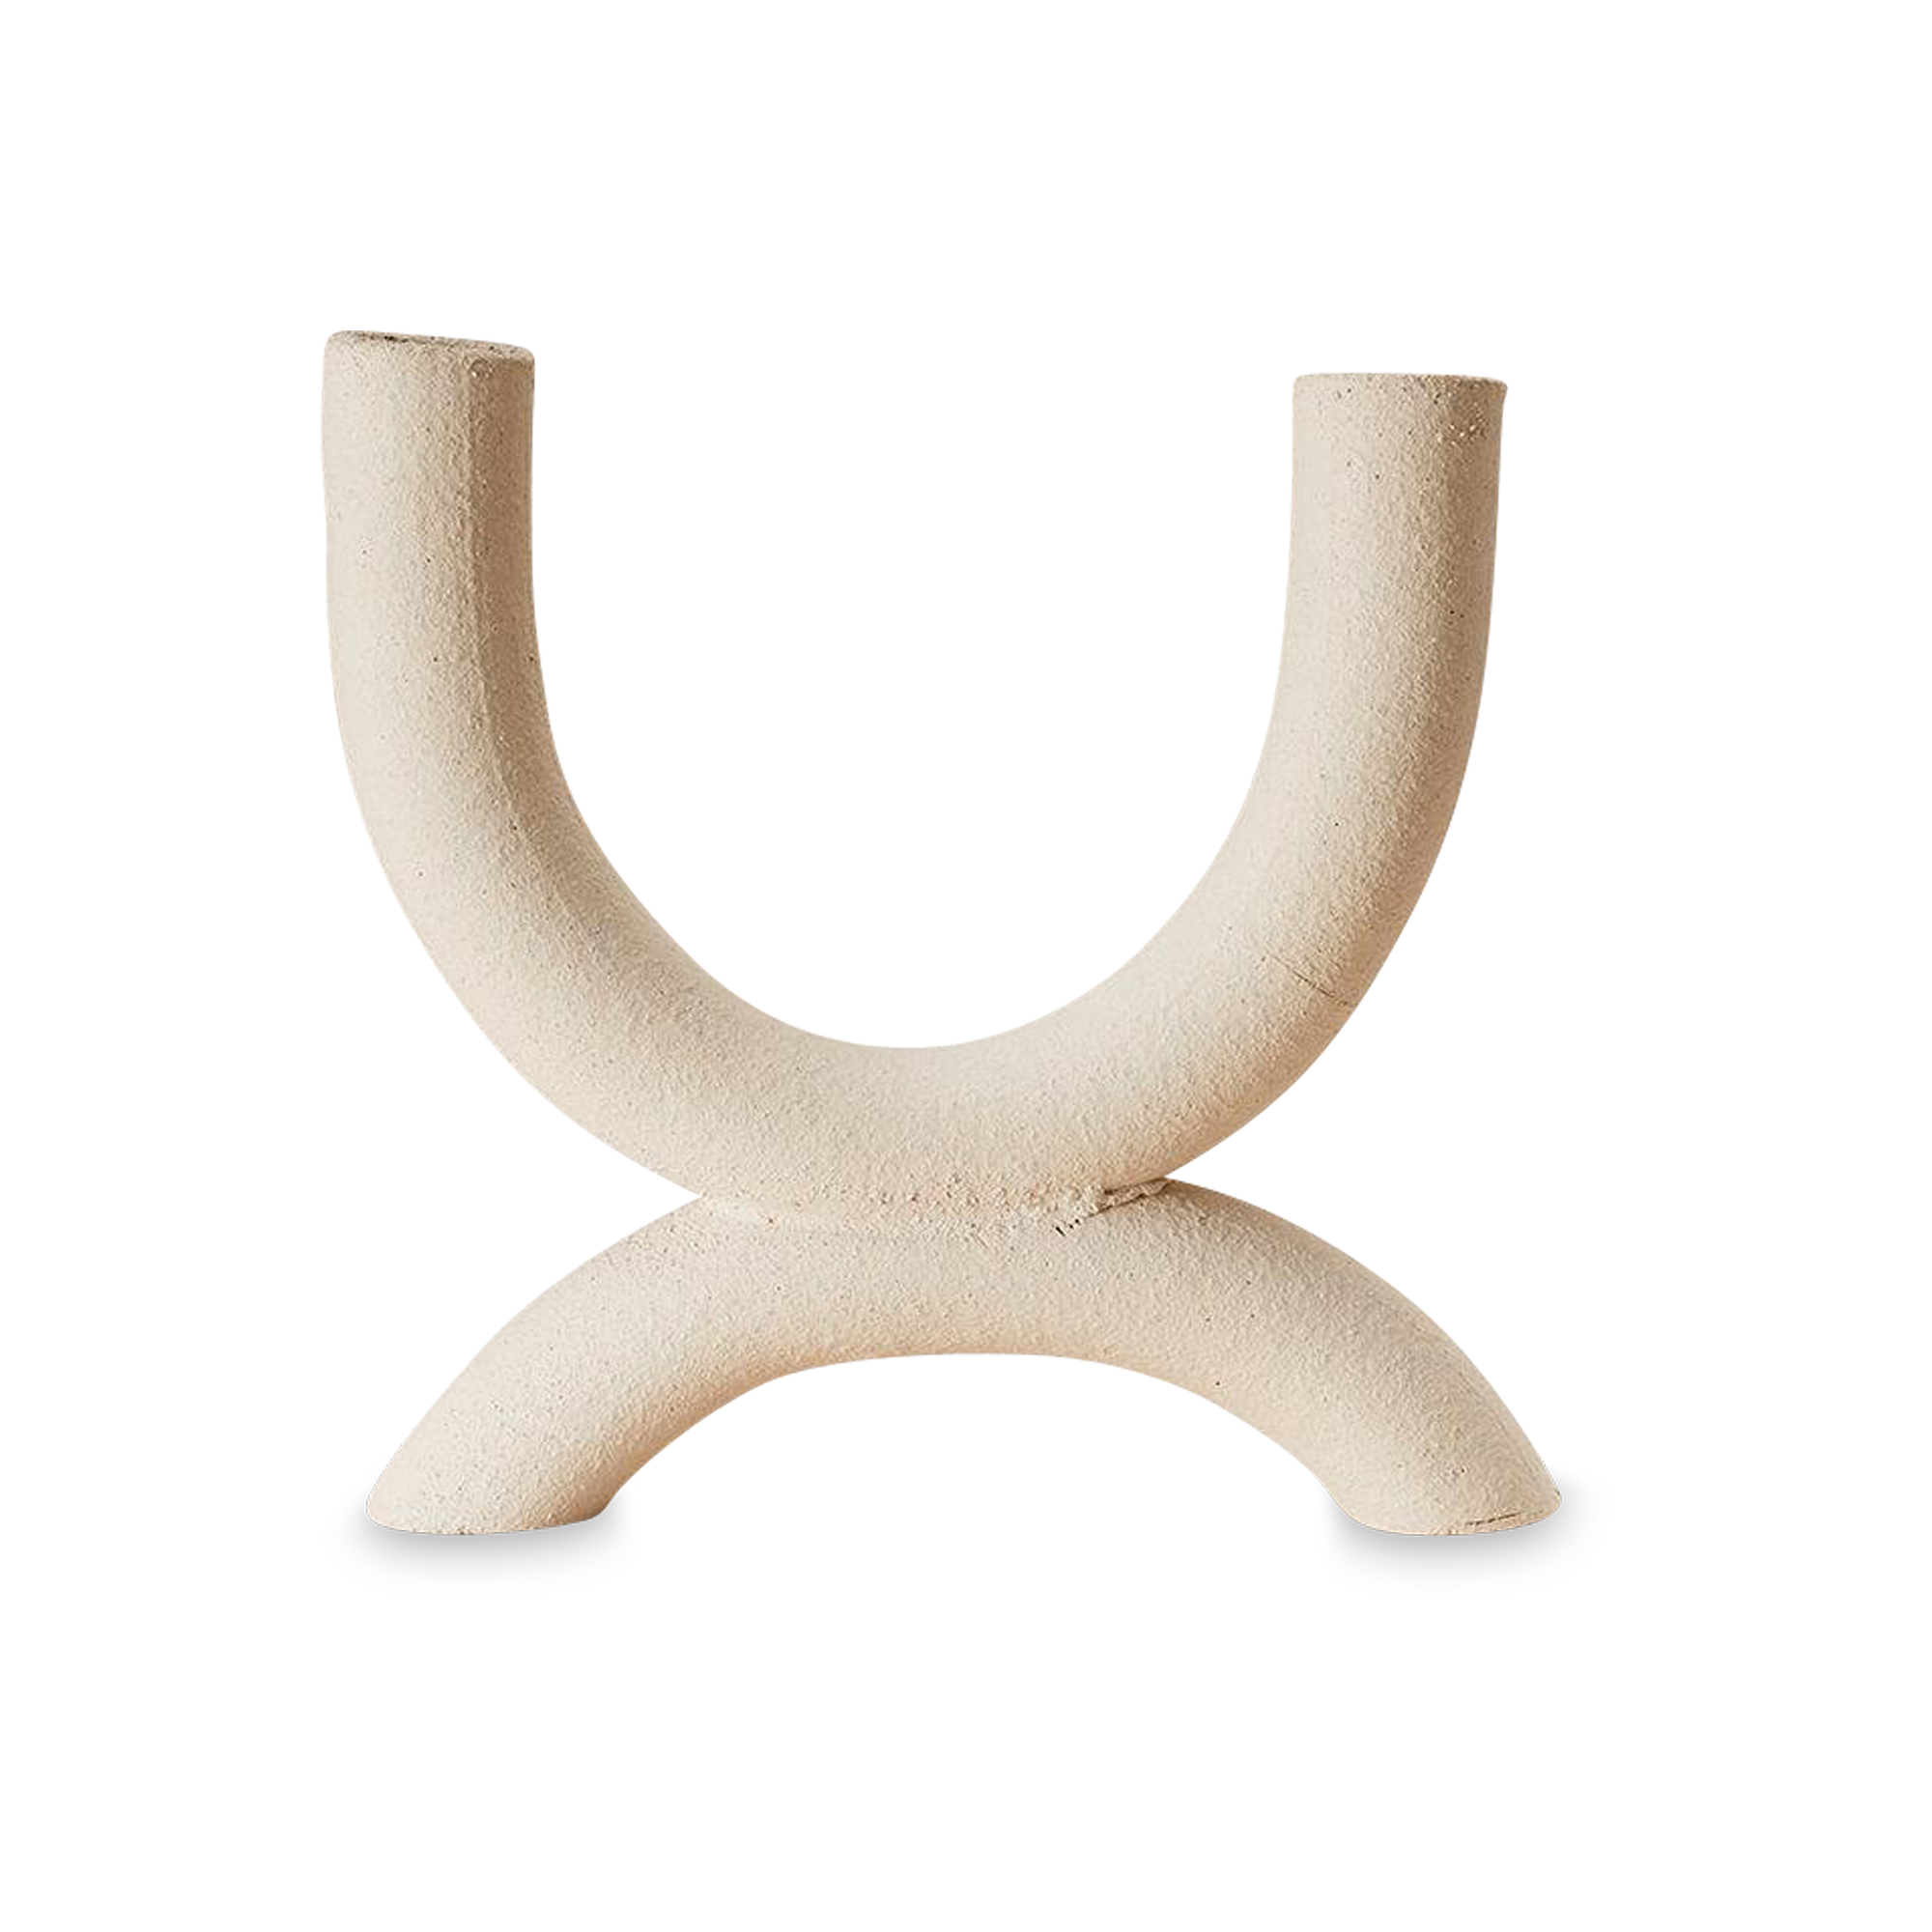 Crafted in raw ceramic, it can stand alone or intertwine with the Harmony Candleholder.